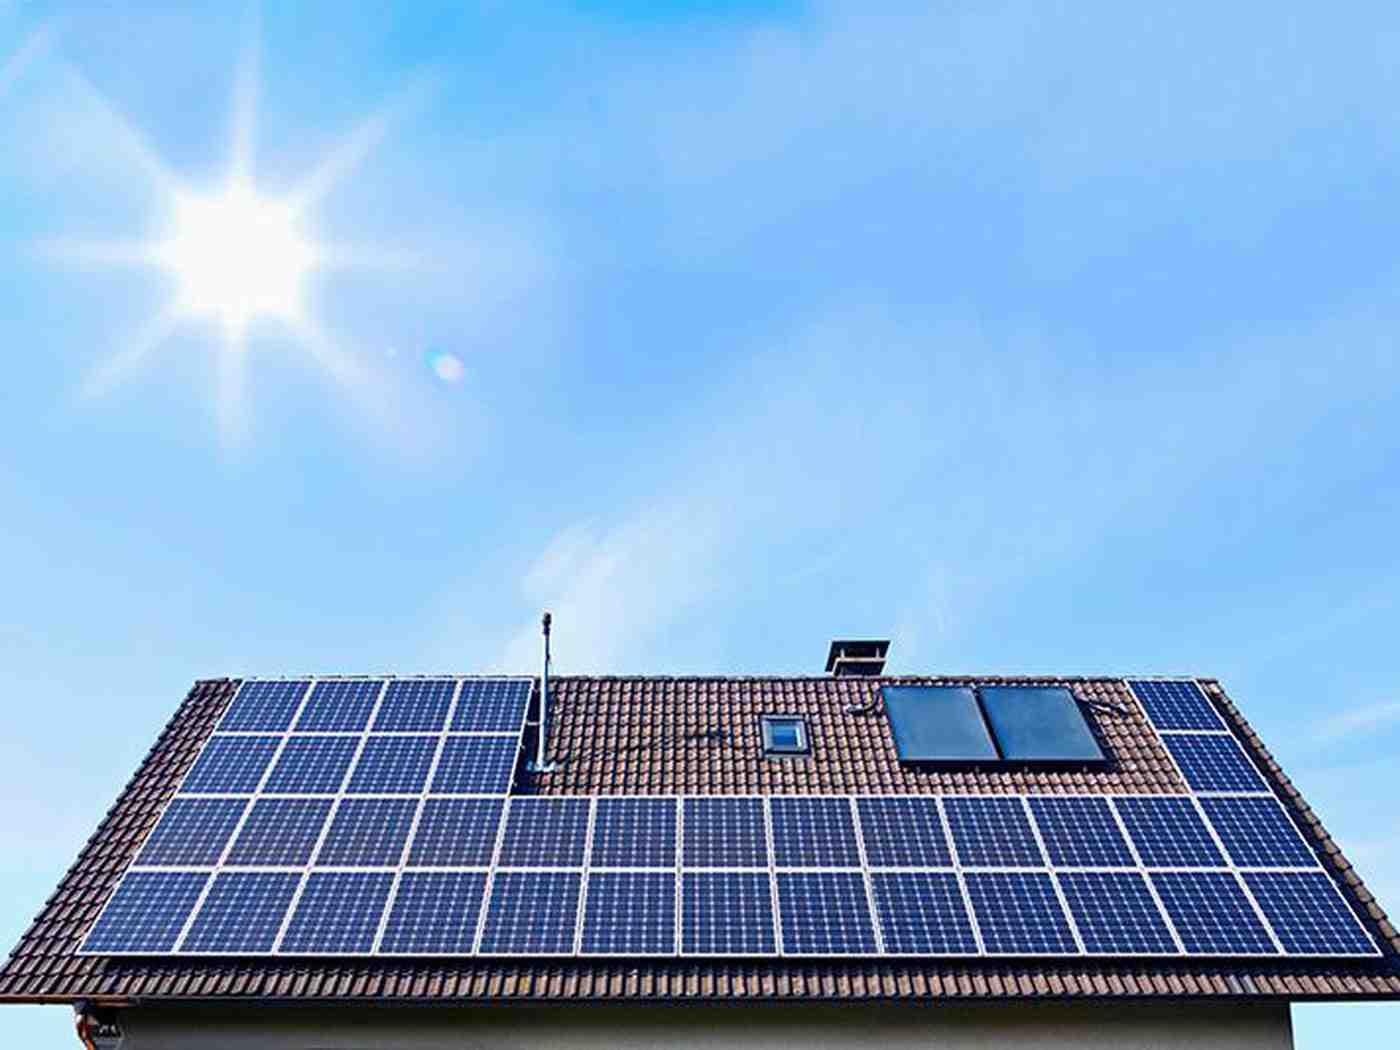 Powered by the sun: should you invest in solar power?